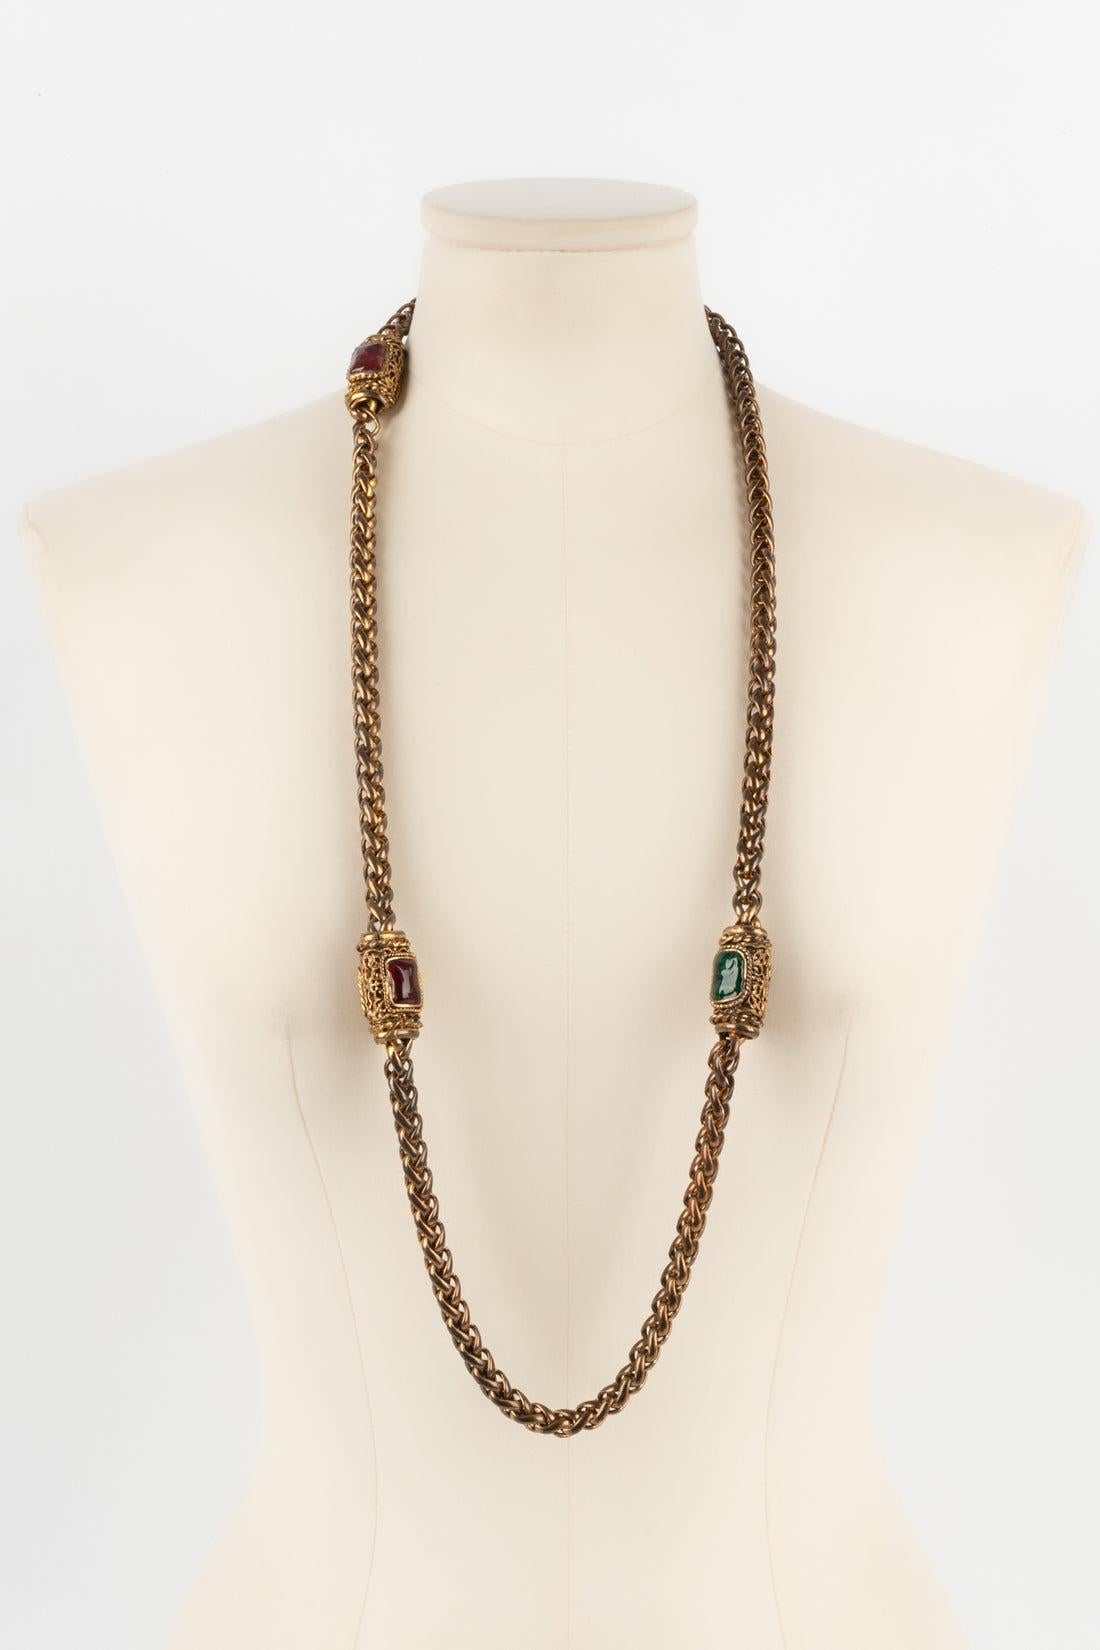 Chanel - (Made in France) Golden metal necklace with an old gold color and colored glass paste elements. Jewelry from the 1980s.

Additional information:
Condition: Very good condition
Dimensions: Length: 95 cm
Period: 20th Century

Seller